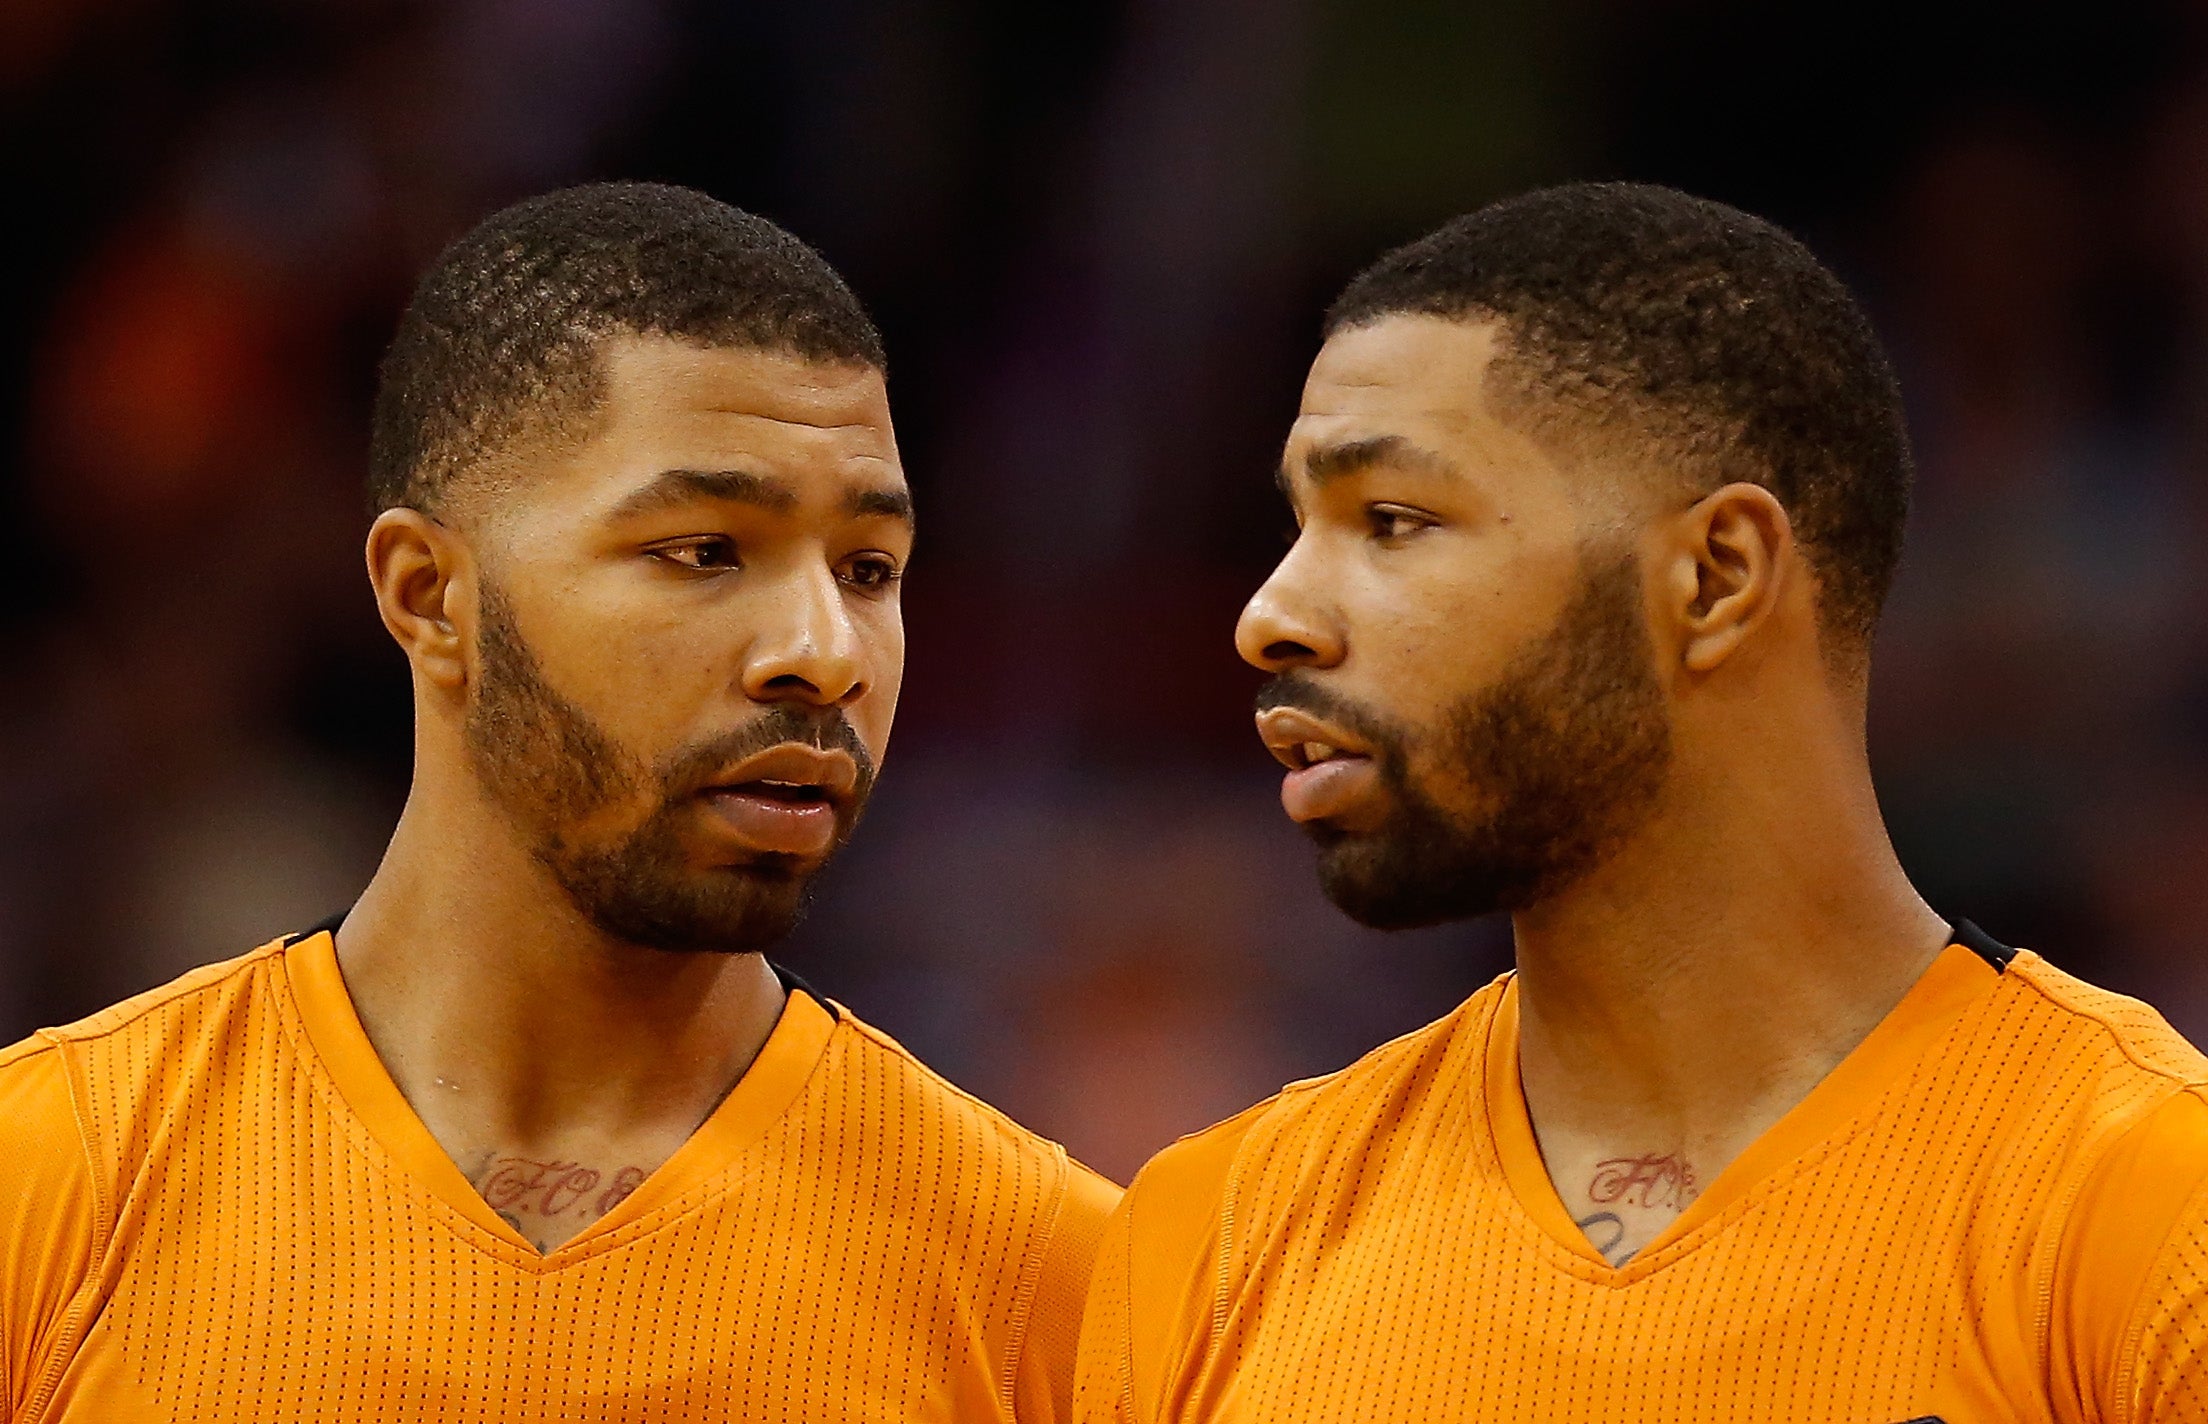 Get to know new Celtic Marcus Morris through his close relationship with  his twin brother